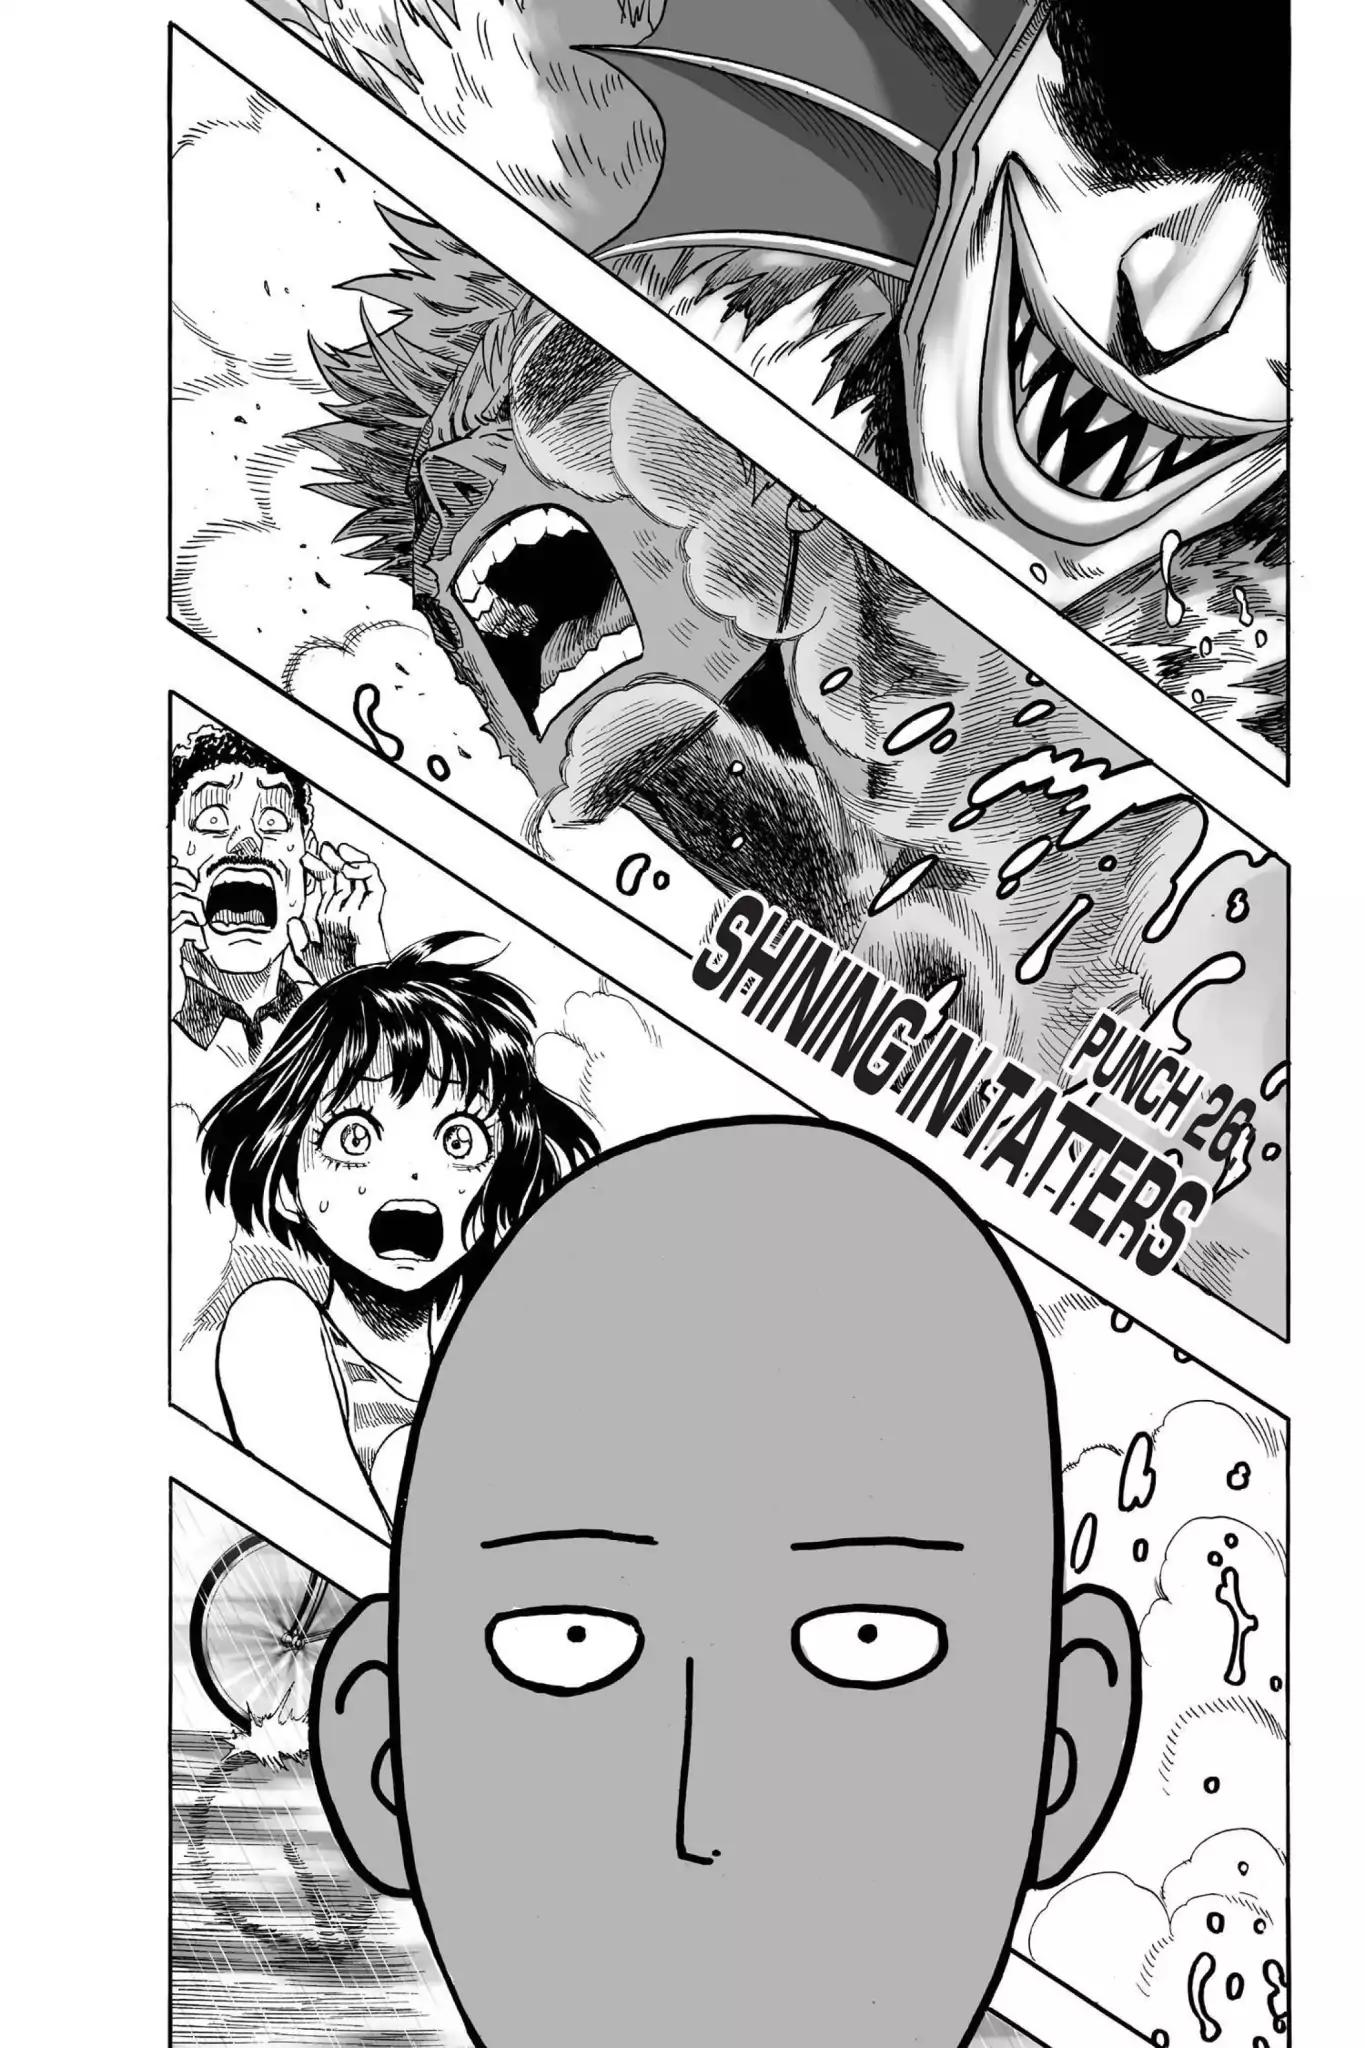 One-Punch Man chapter 27 page 1